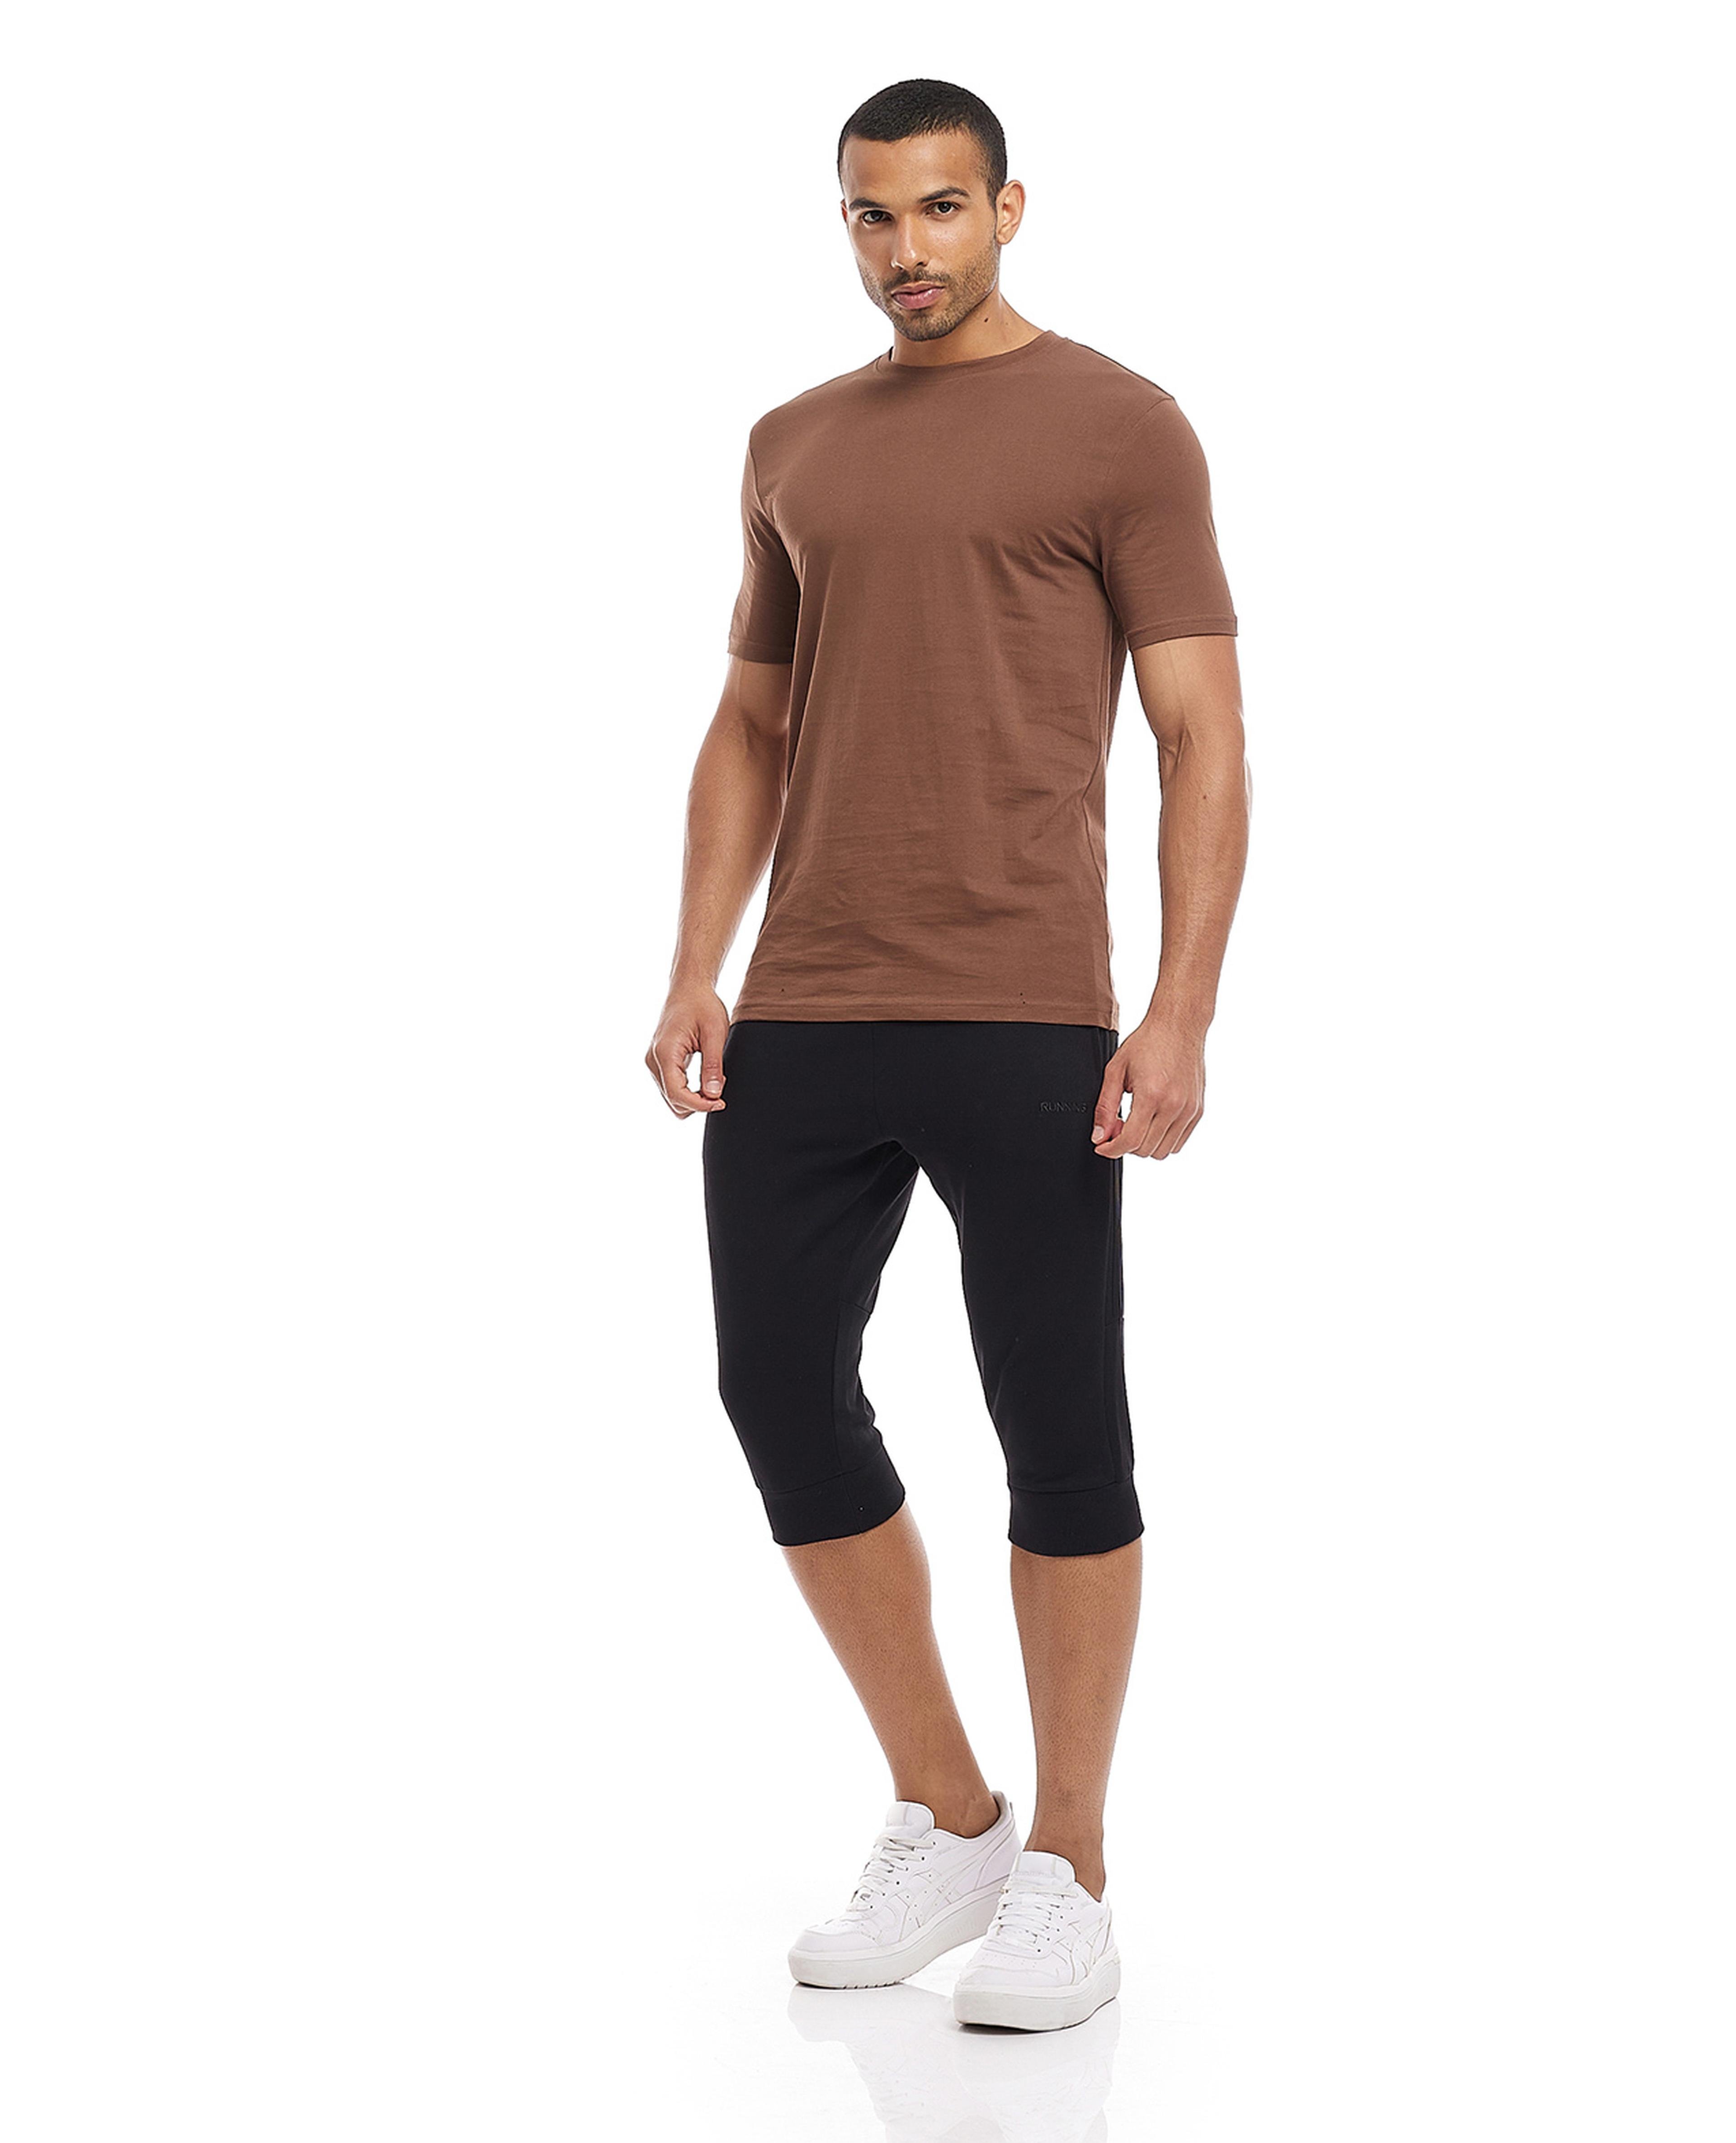 Solid Capris with Drawstring Waist